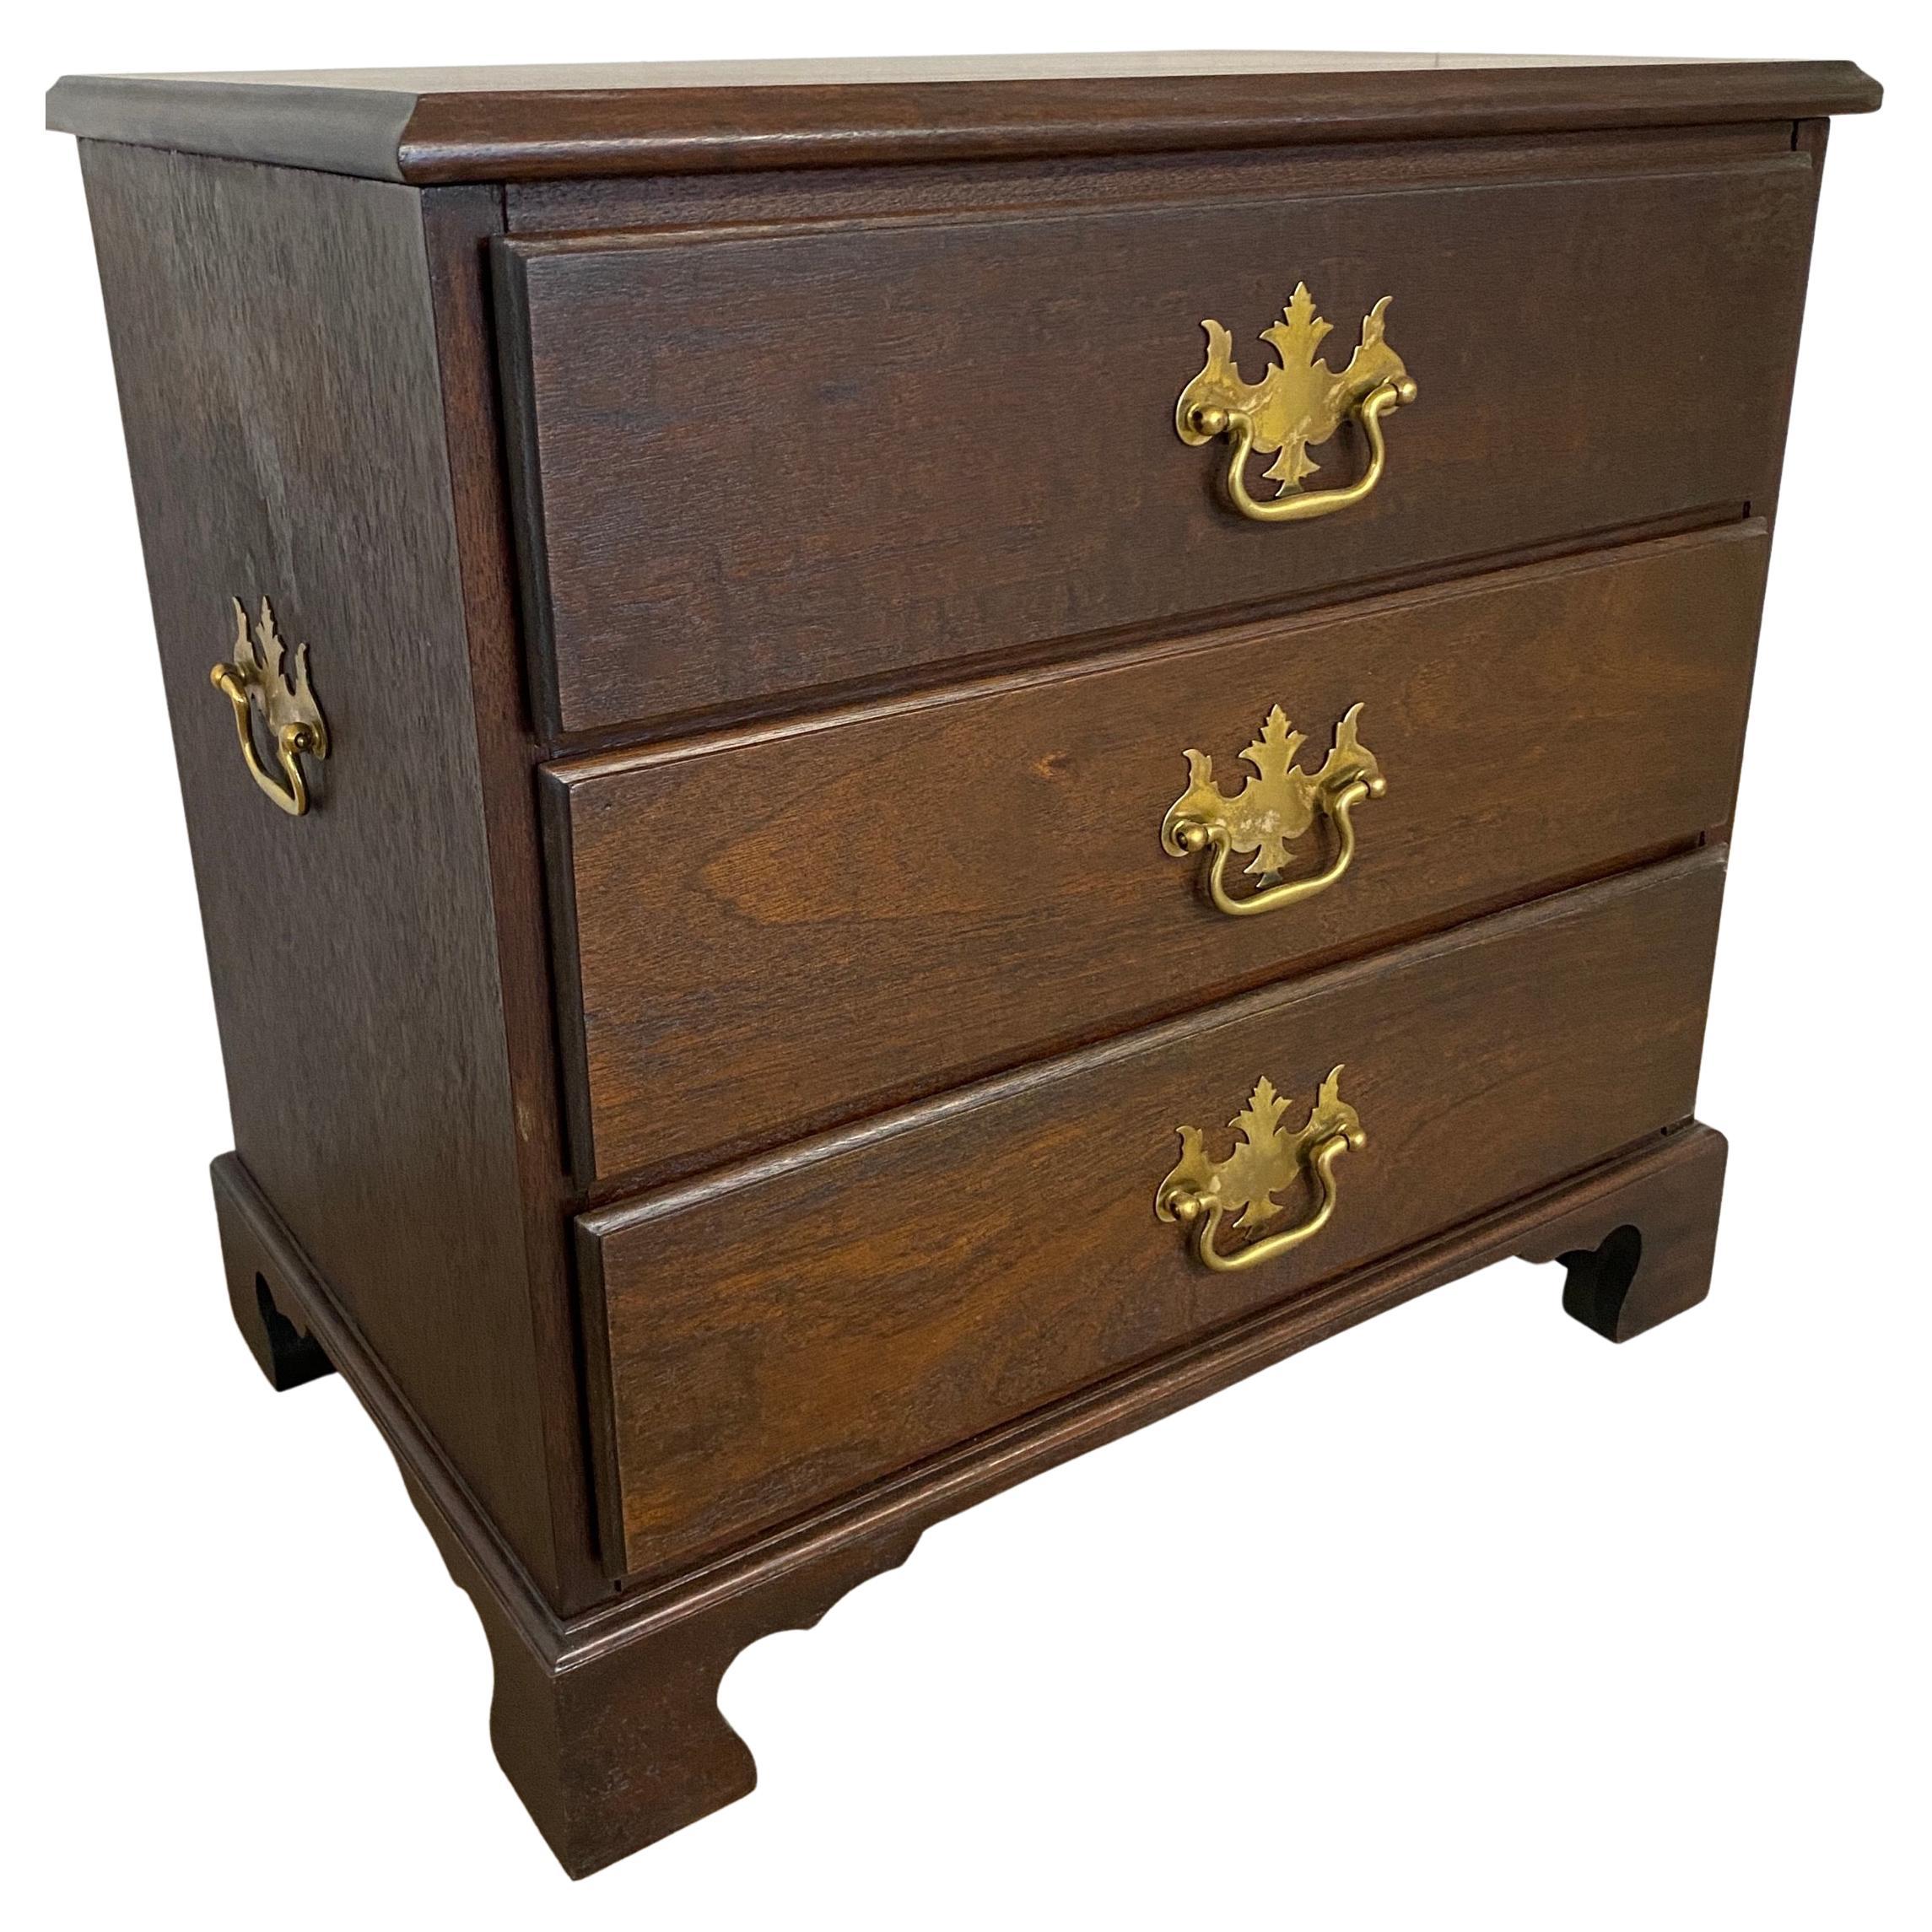 Low Georgian Style Mahogany Chest/Nightstand or End Table